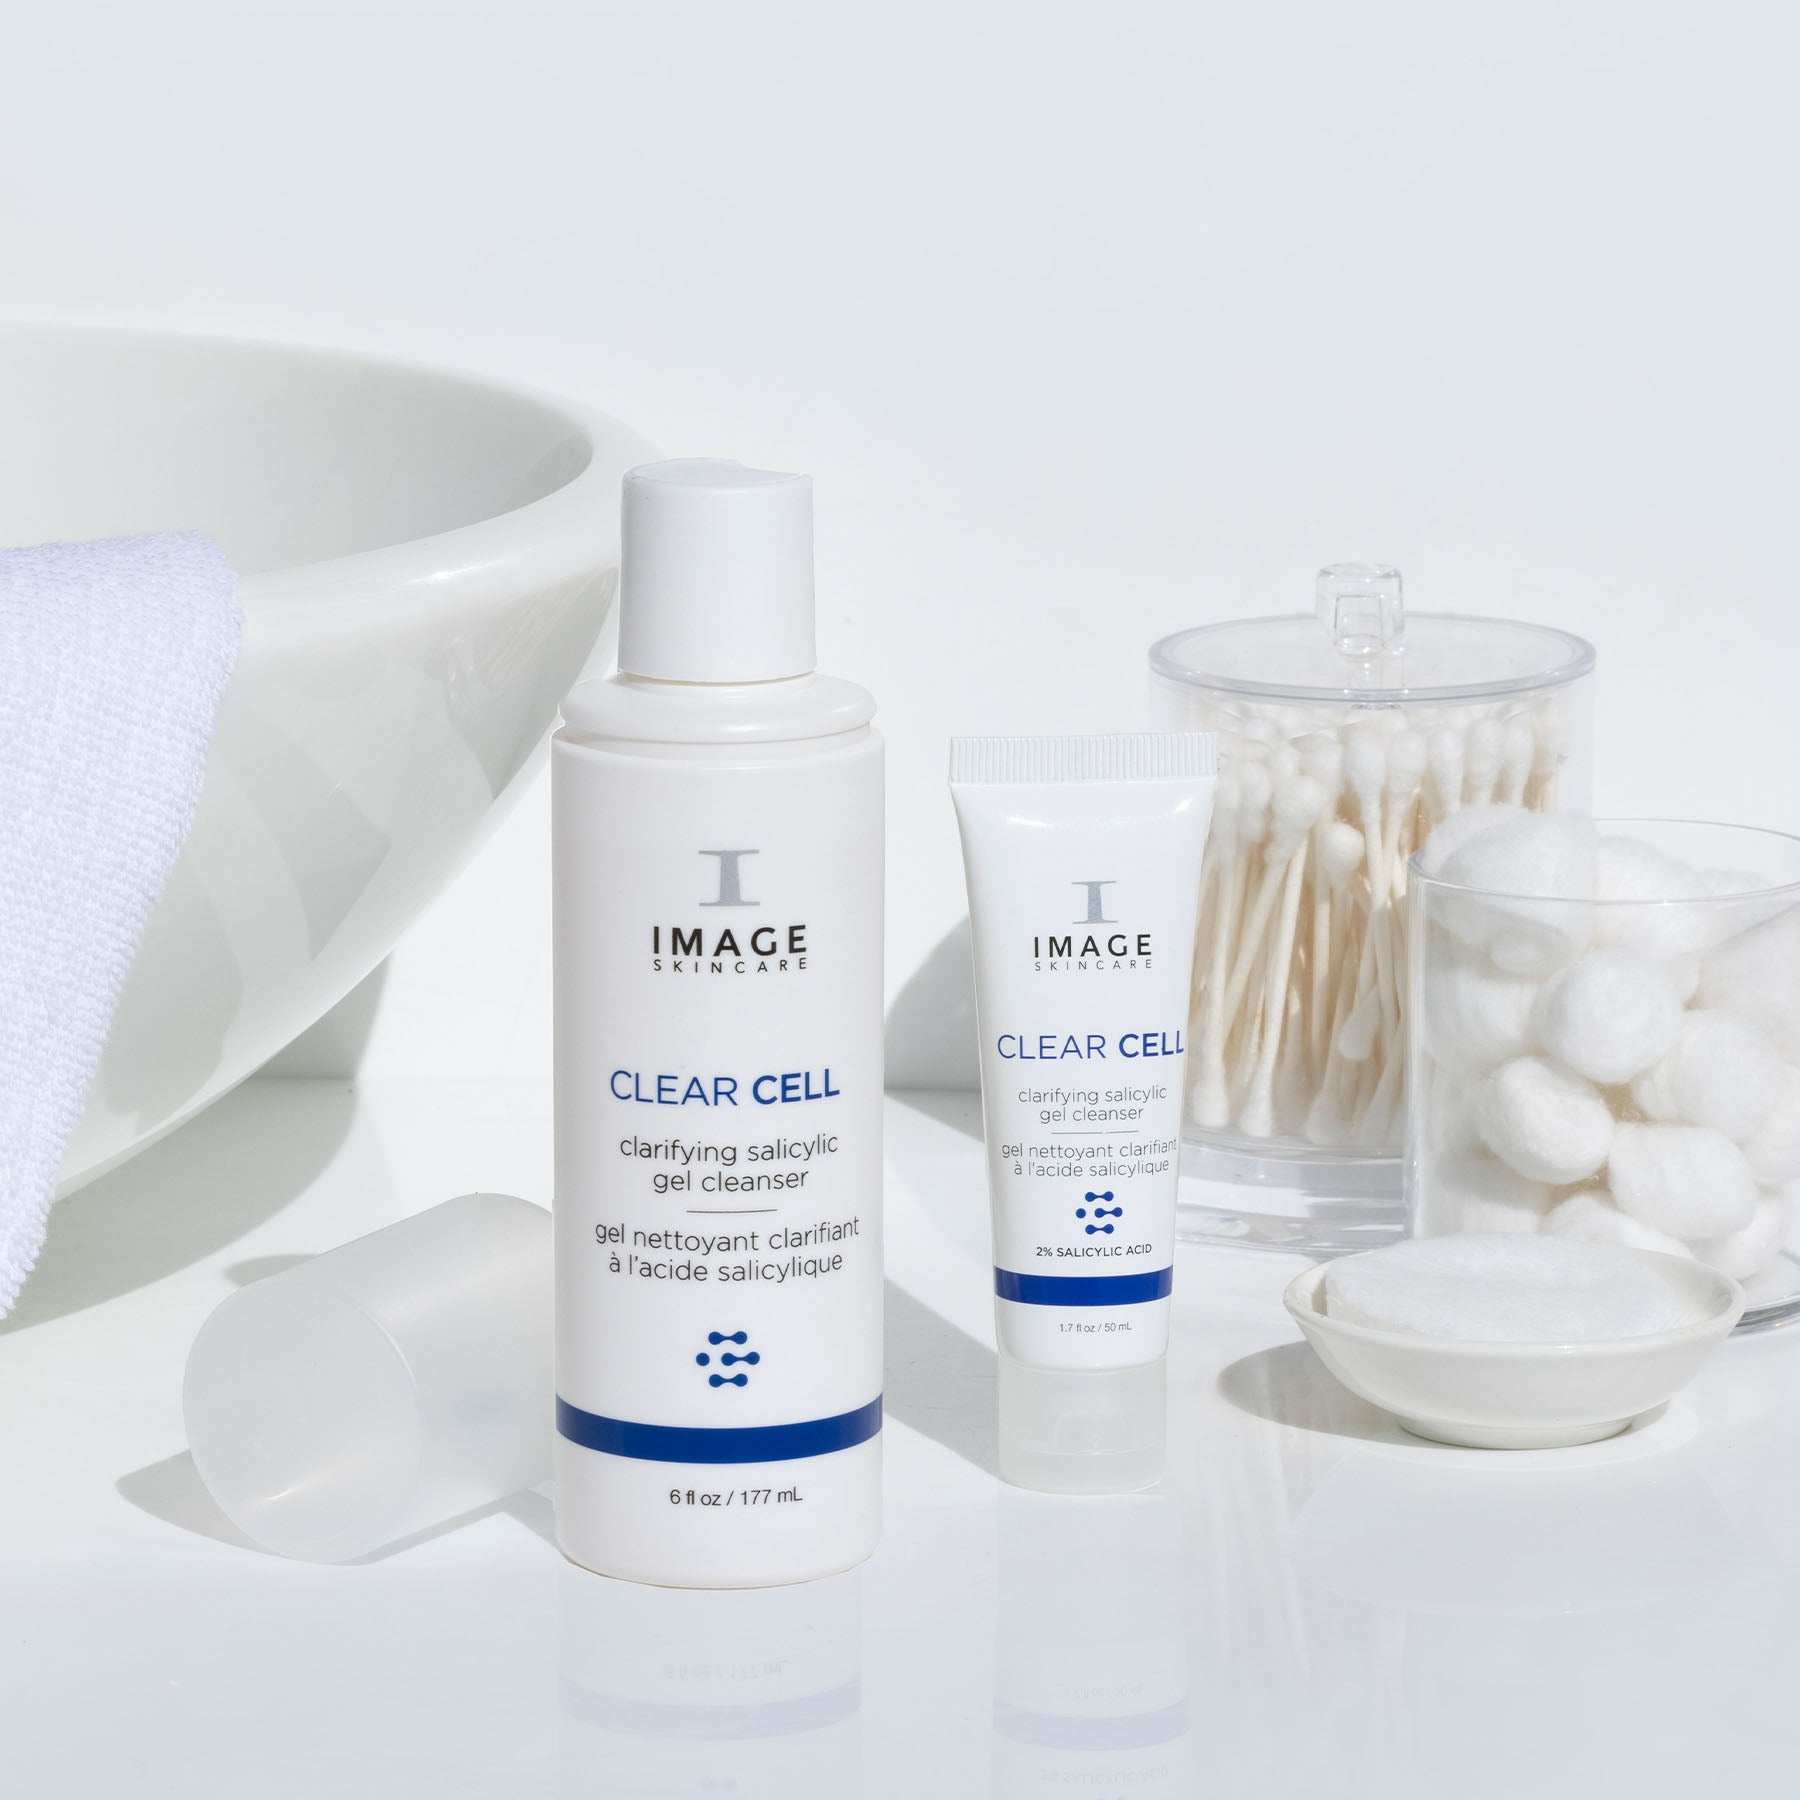 CLEAR CELL clarifying salicylic gel cleanser discovery-size